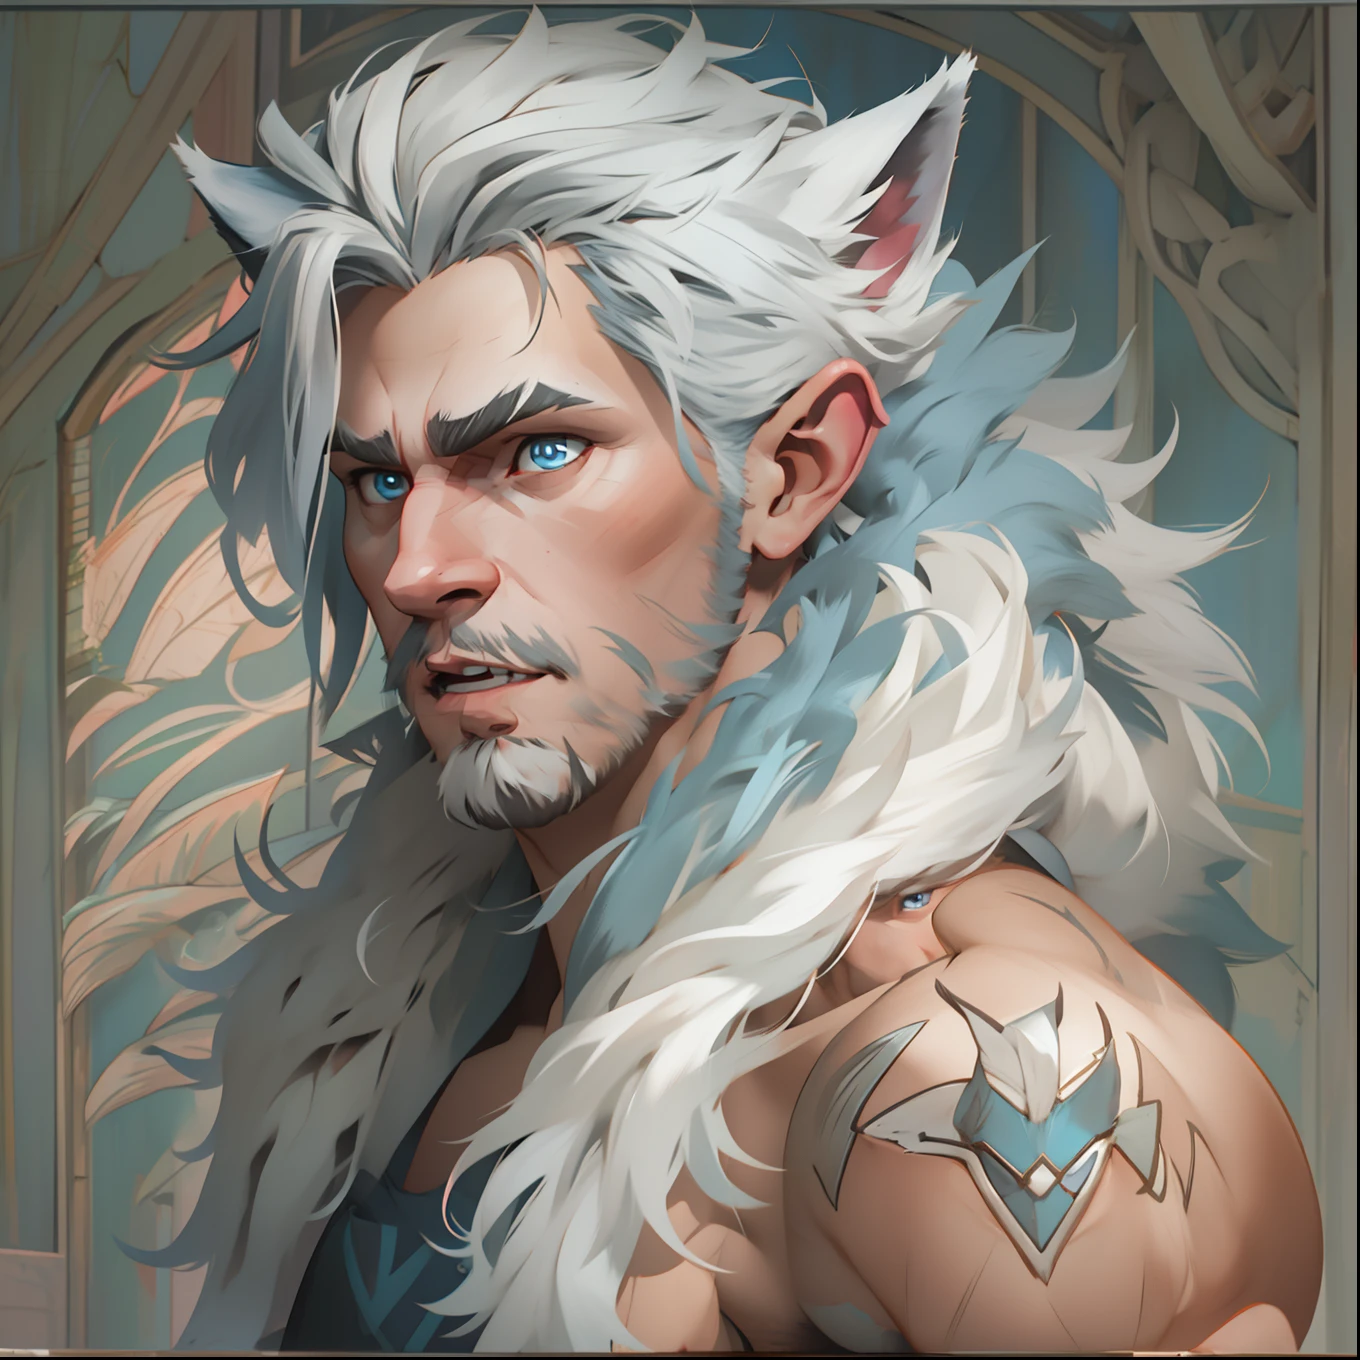 athletic young adult Male with light beard, has flowing white hair, has wolf ears, has wolf tail, shirtless, playful, solo, alone, has goofy look on his face, has bright blue eyes, wearing loose weathered jeans, barefoot